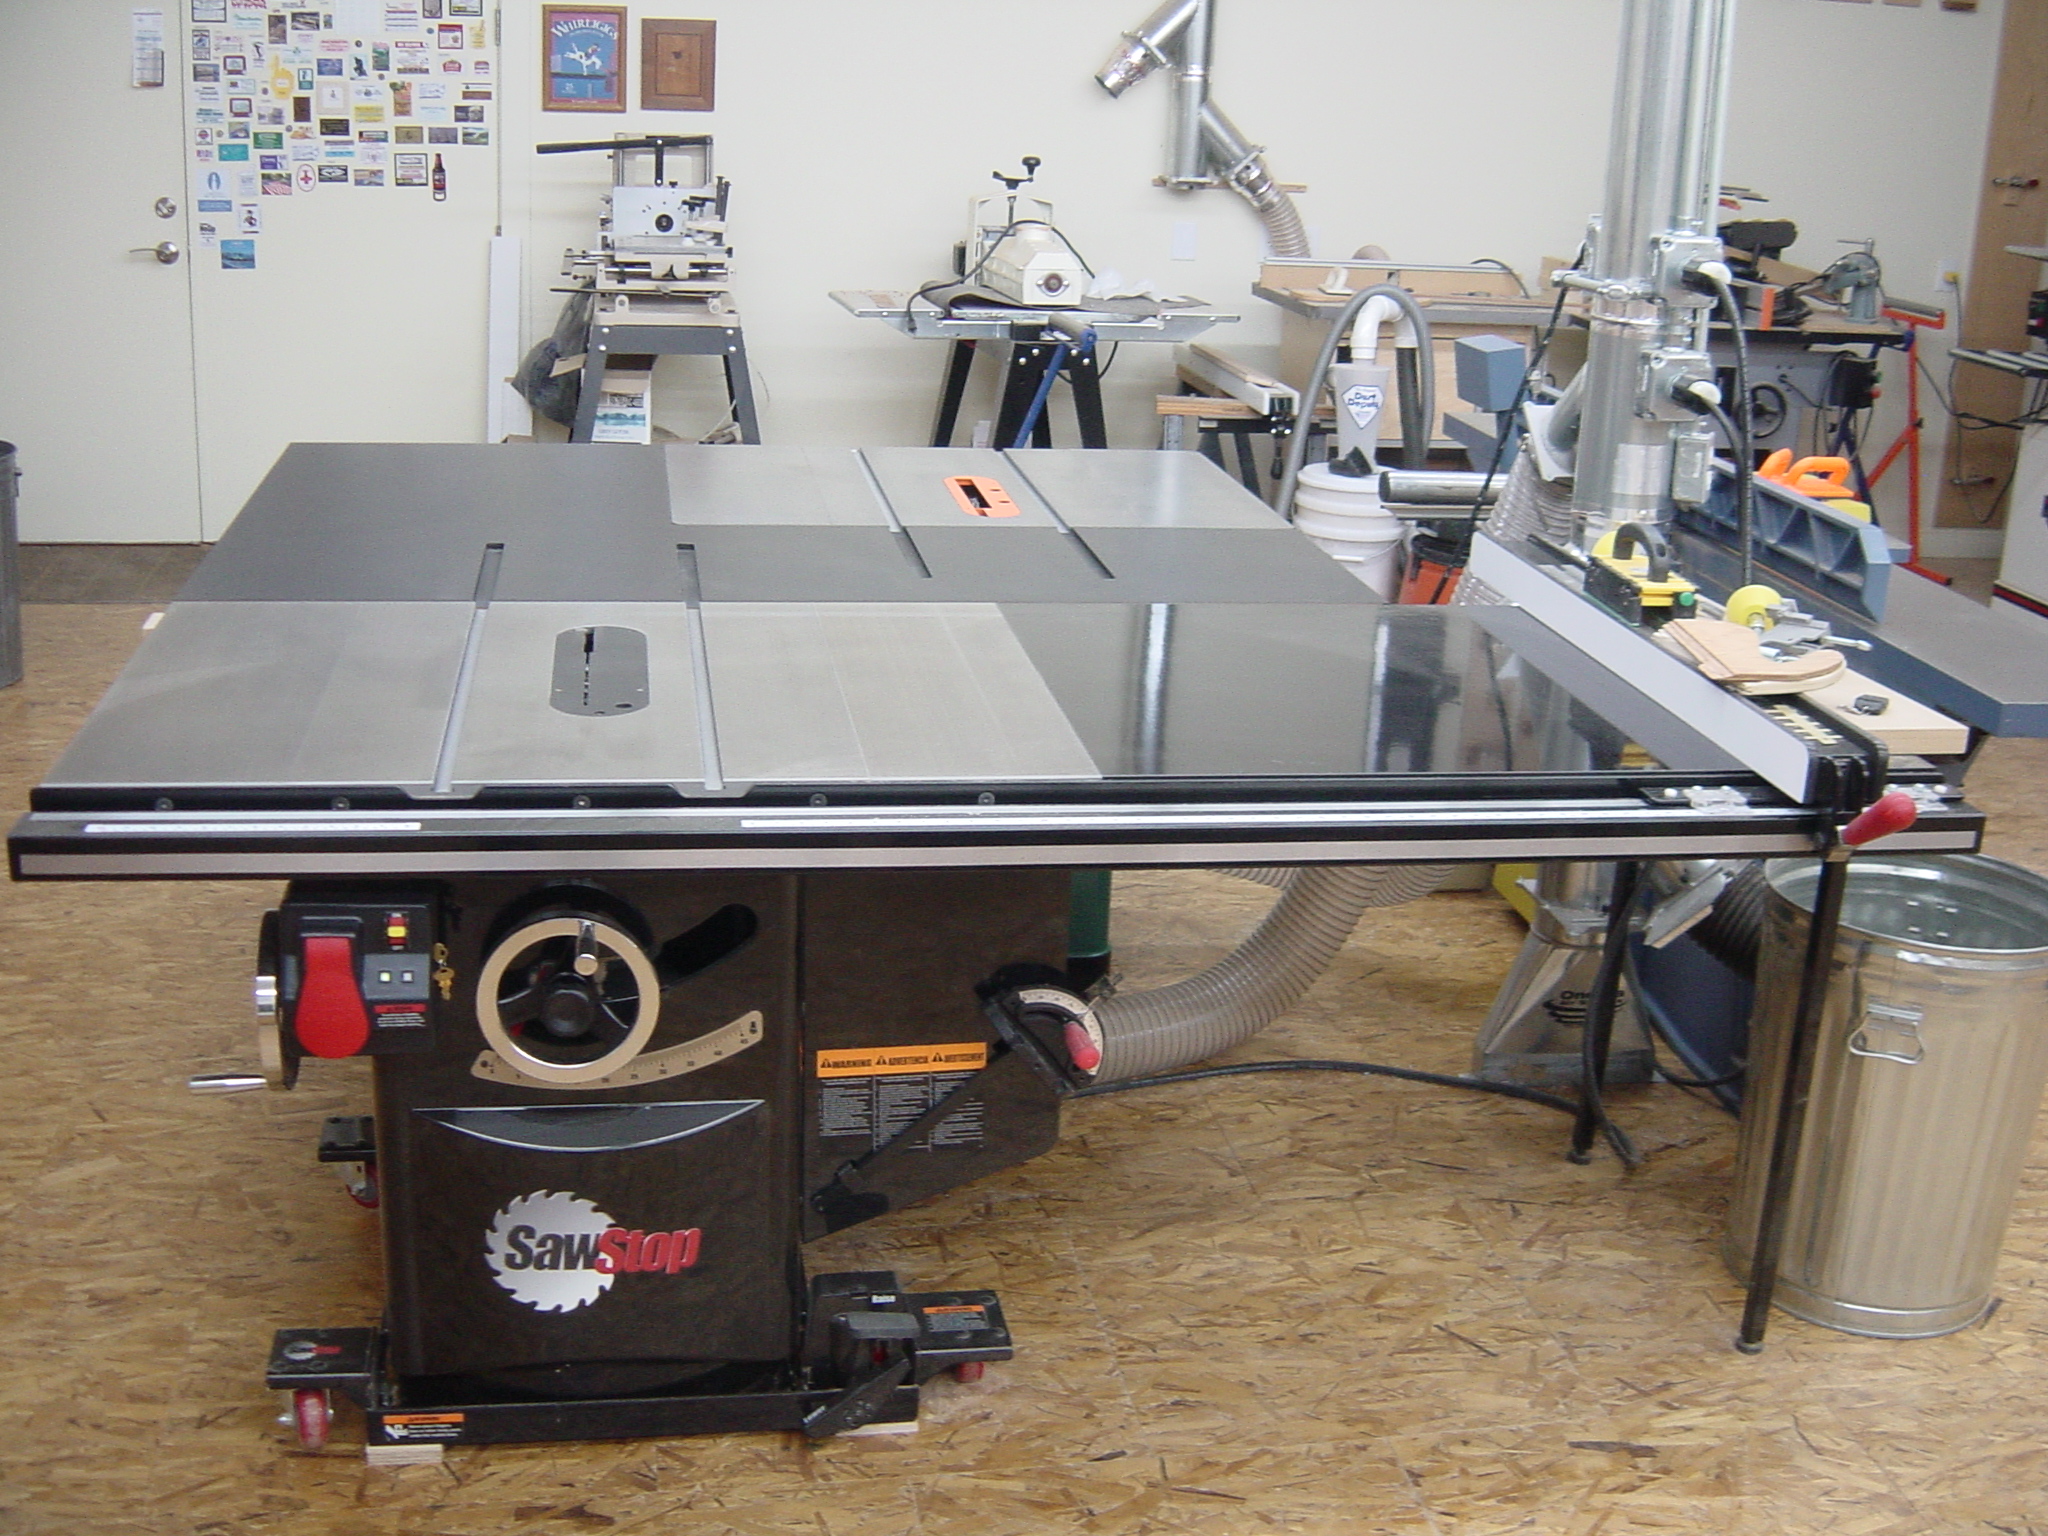 new outfeed table & saw